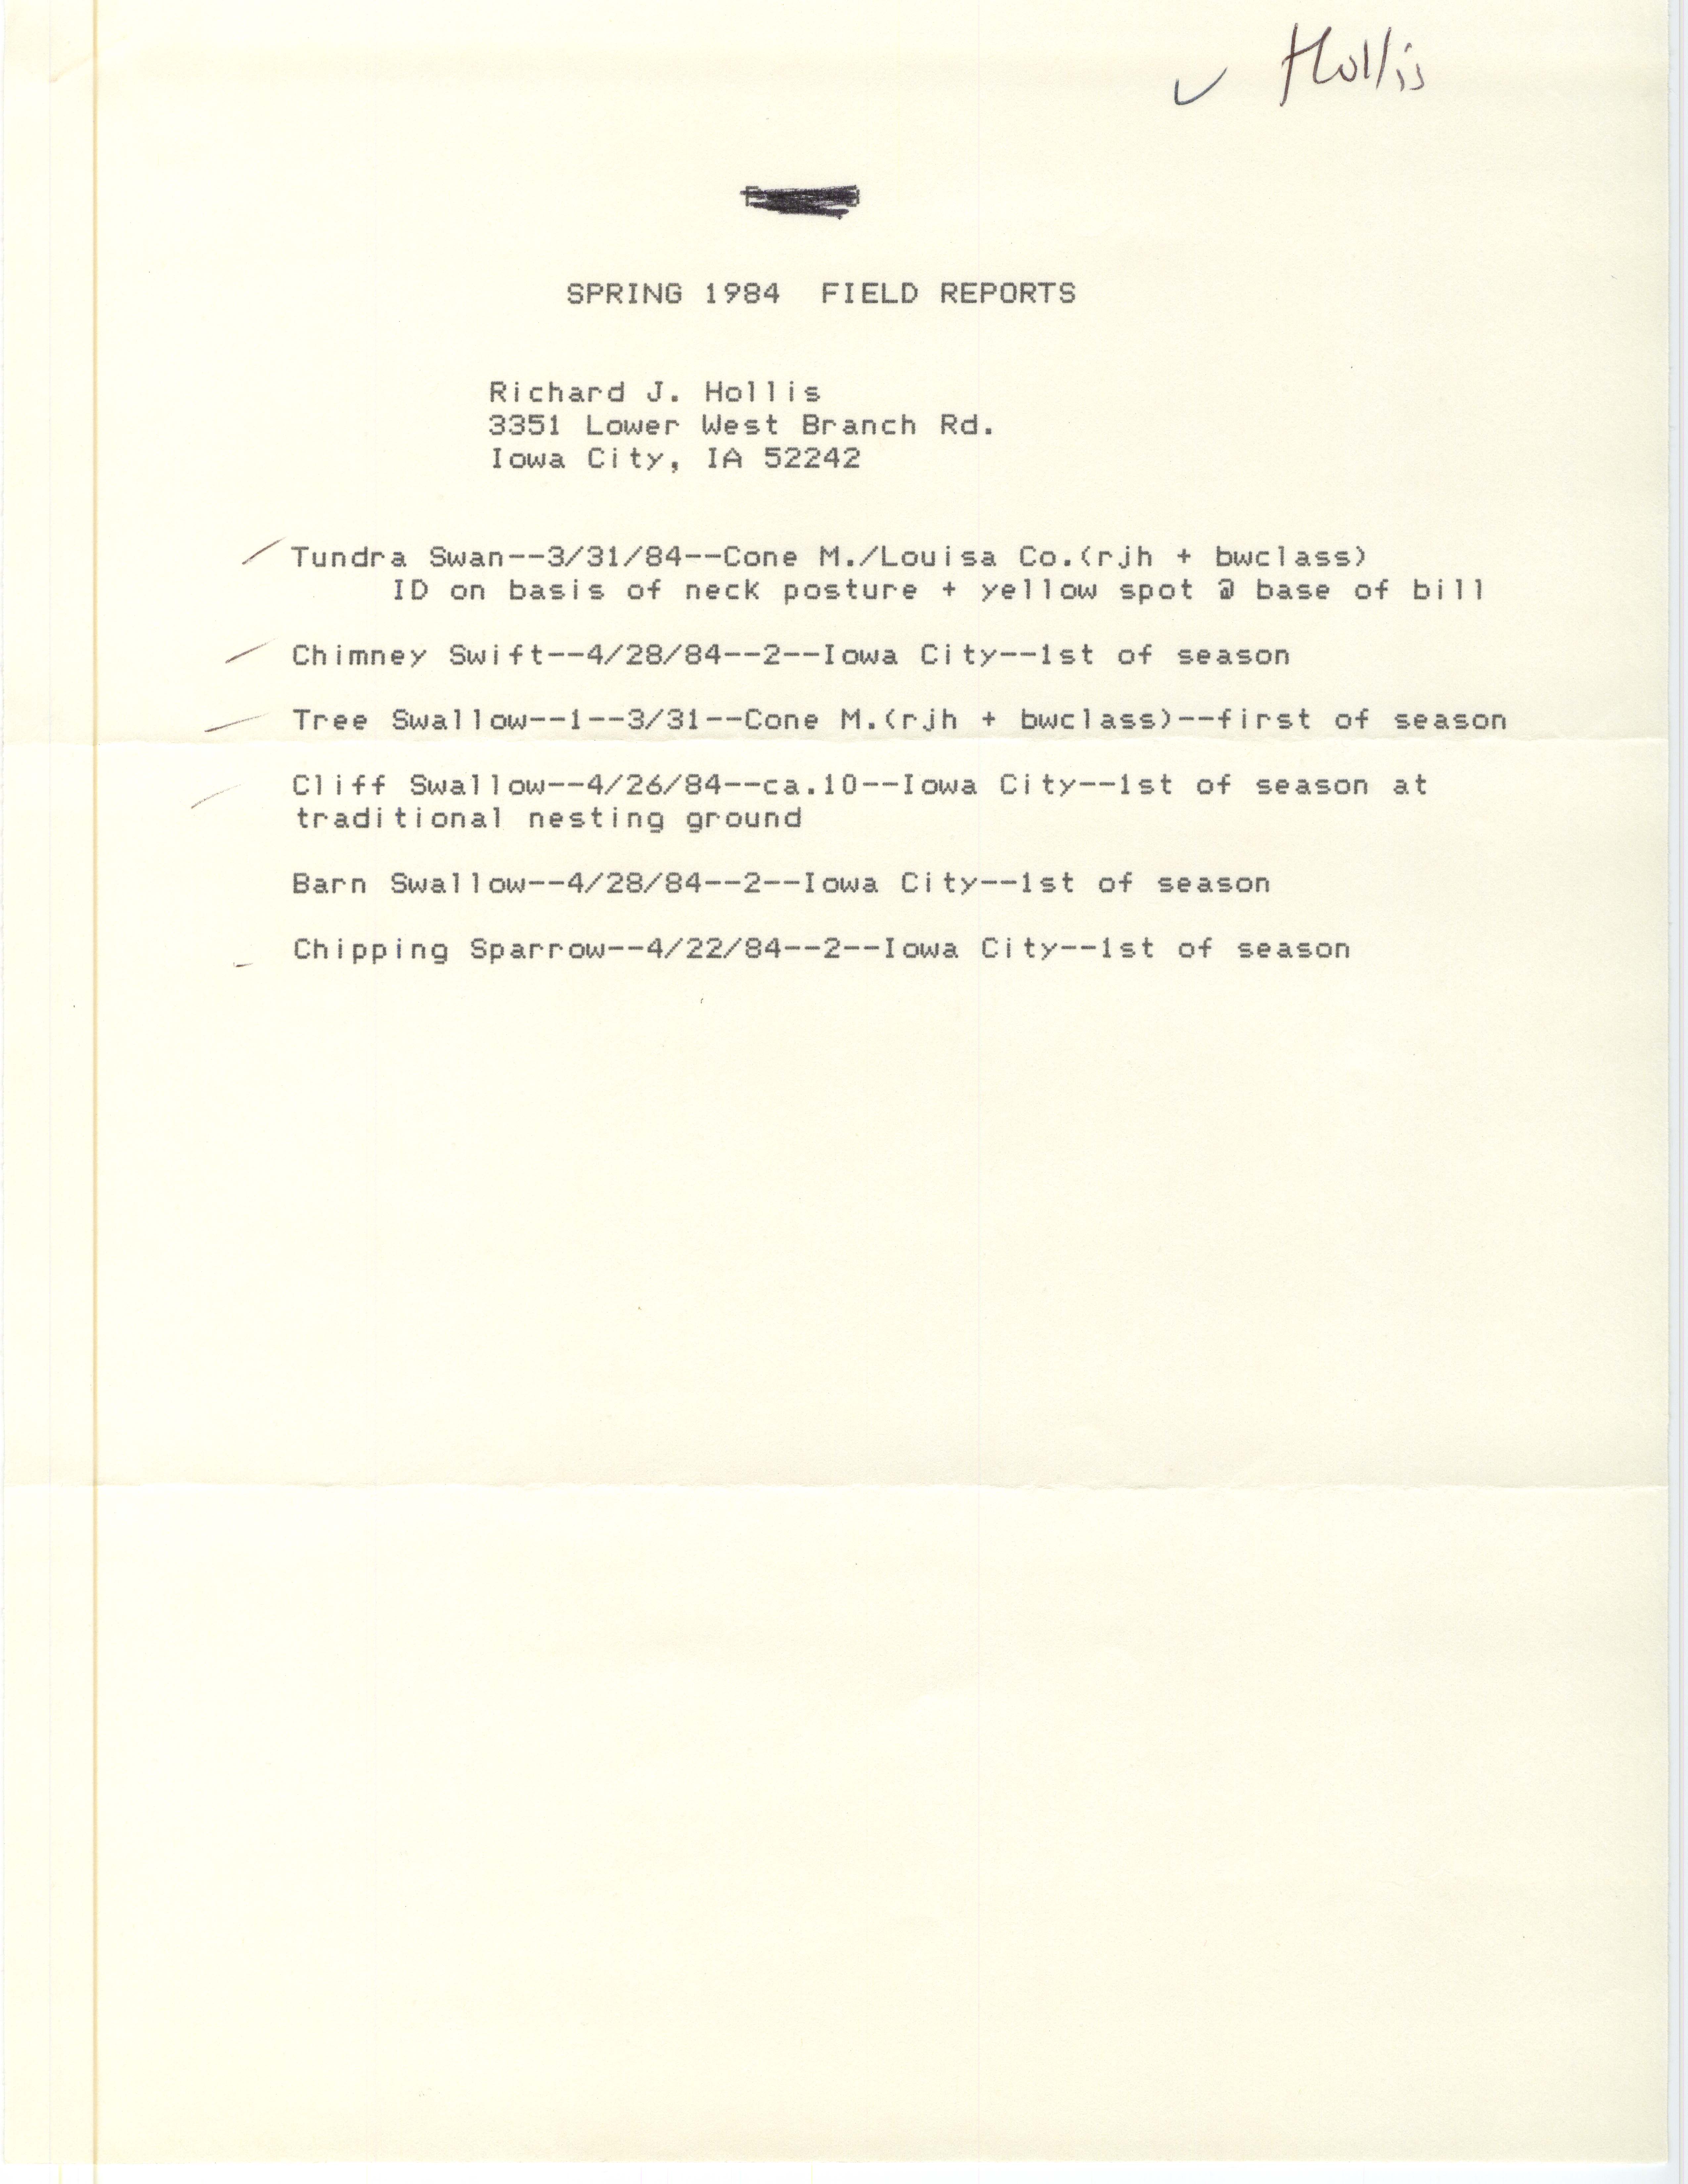 Spring 1984 field reports contributed by Richard Jule Hollis